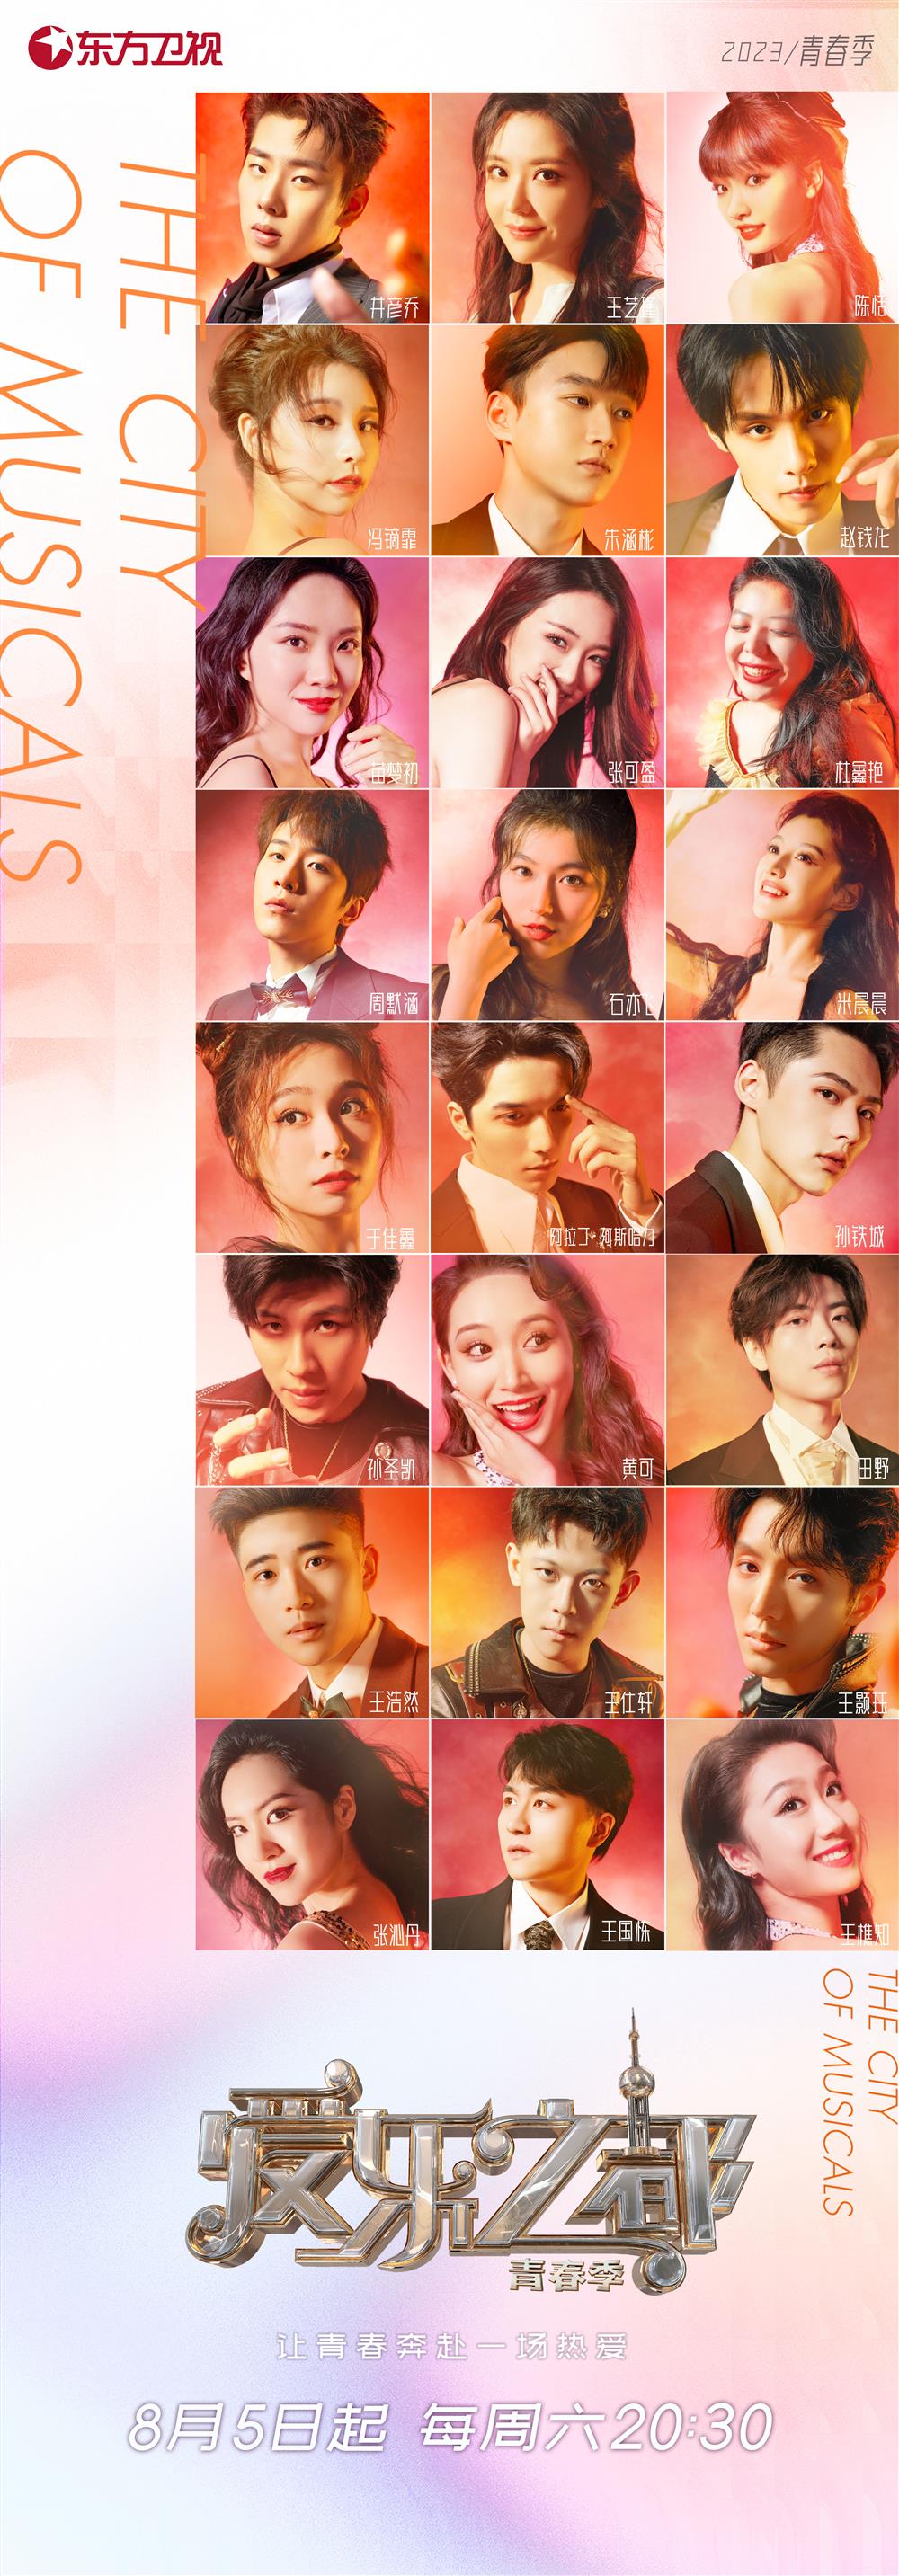 "Love City Youth Season" will be broadcasted on August 5th, focusing on the culture of Chinese musical "New Voice Power" | Musical | Love City Youth Season